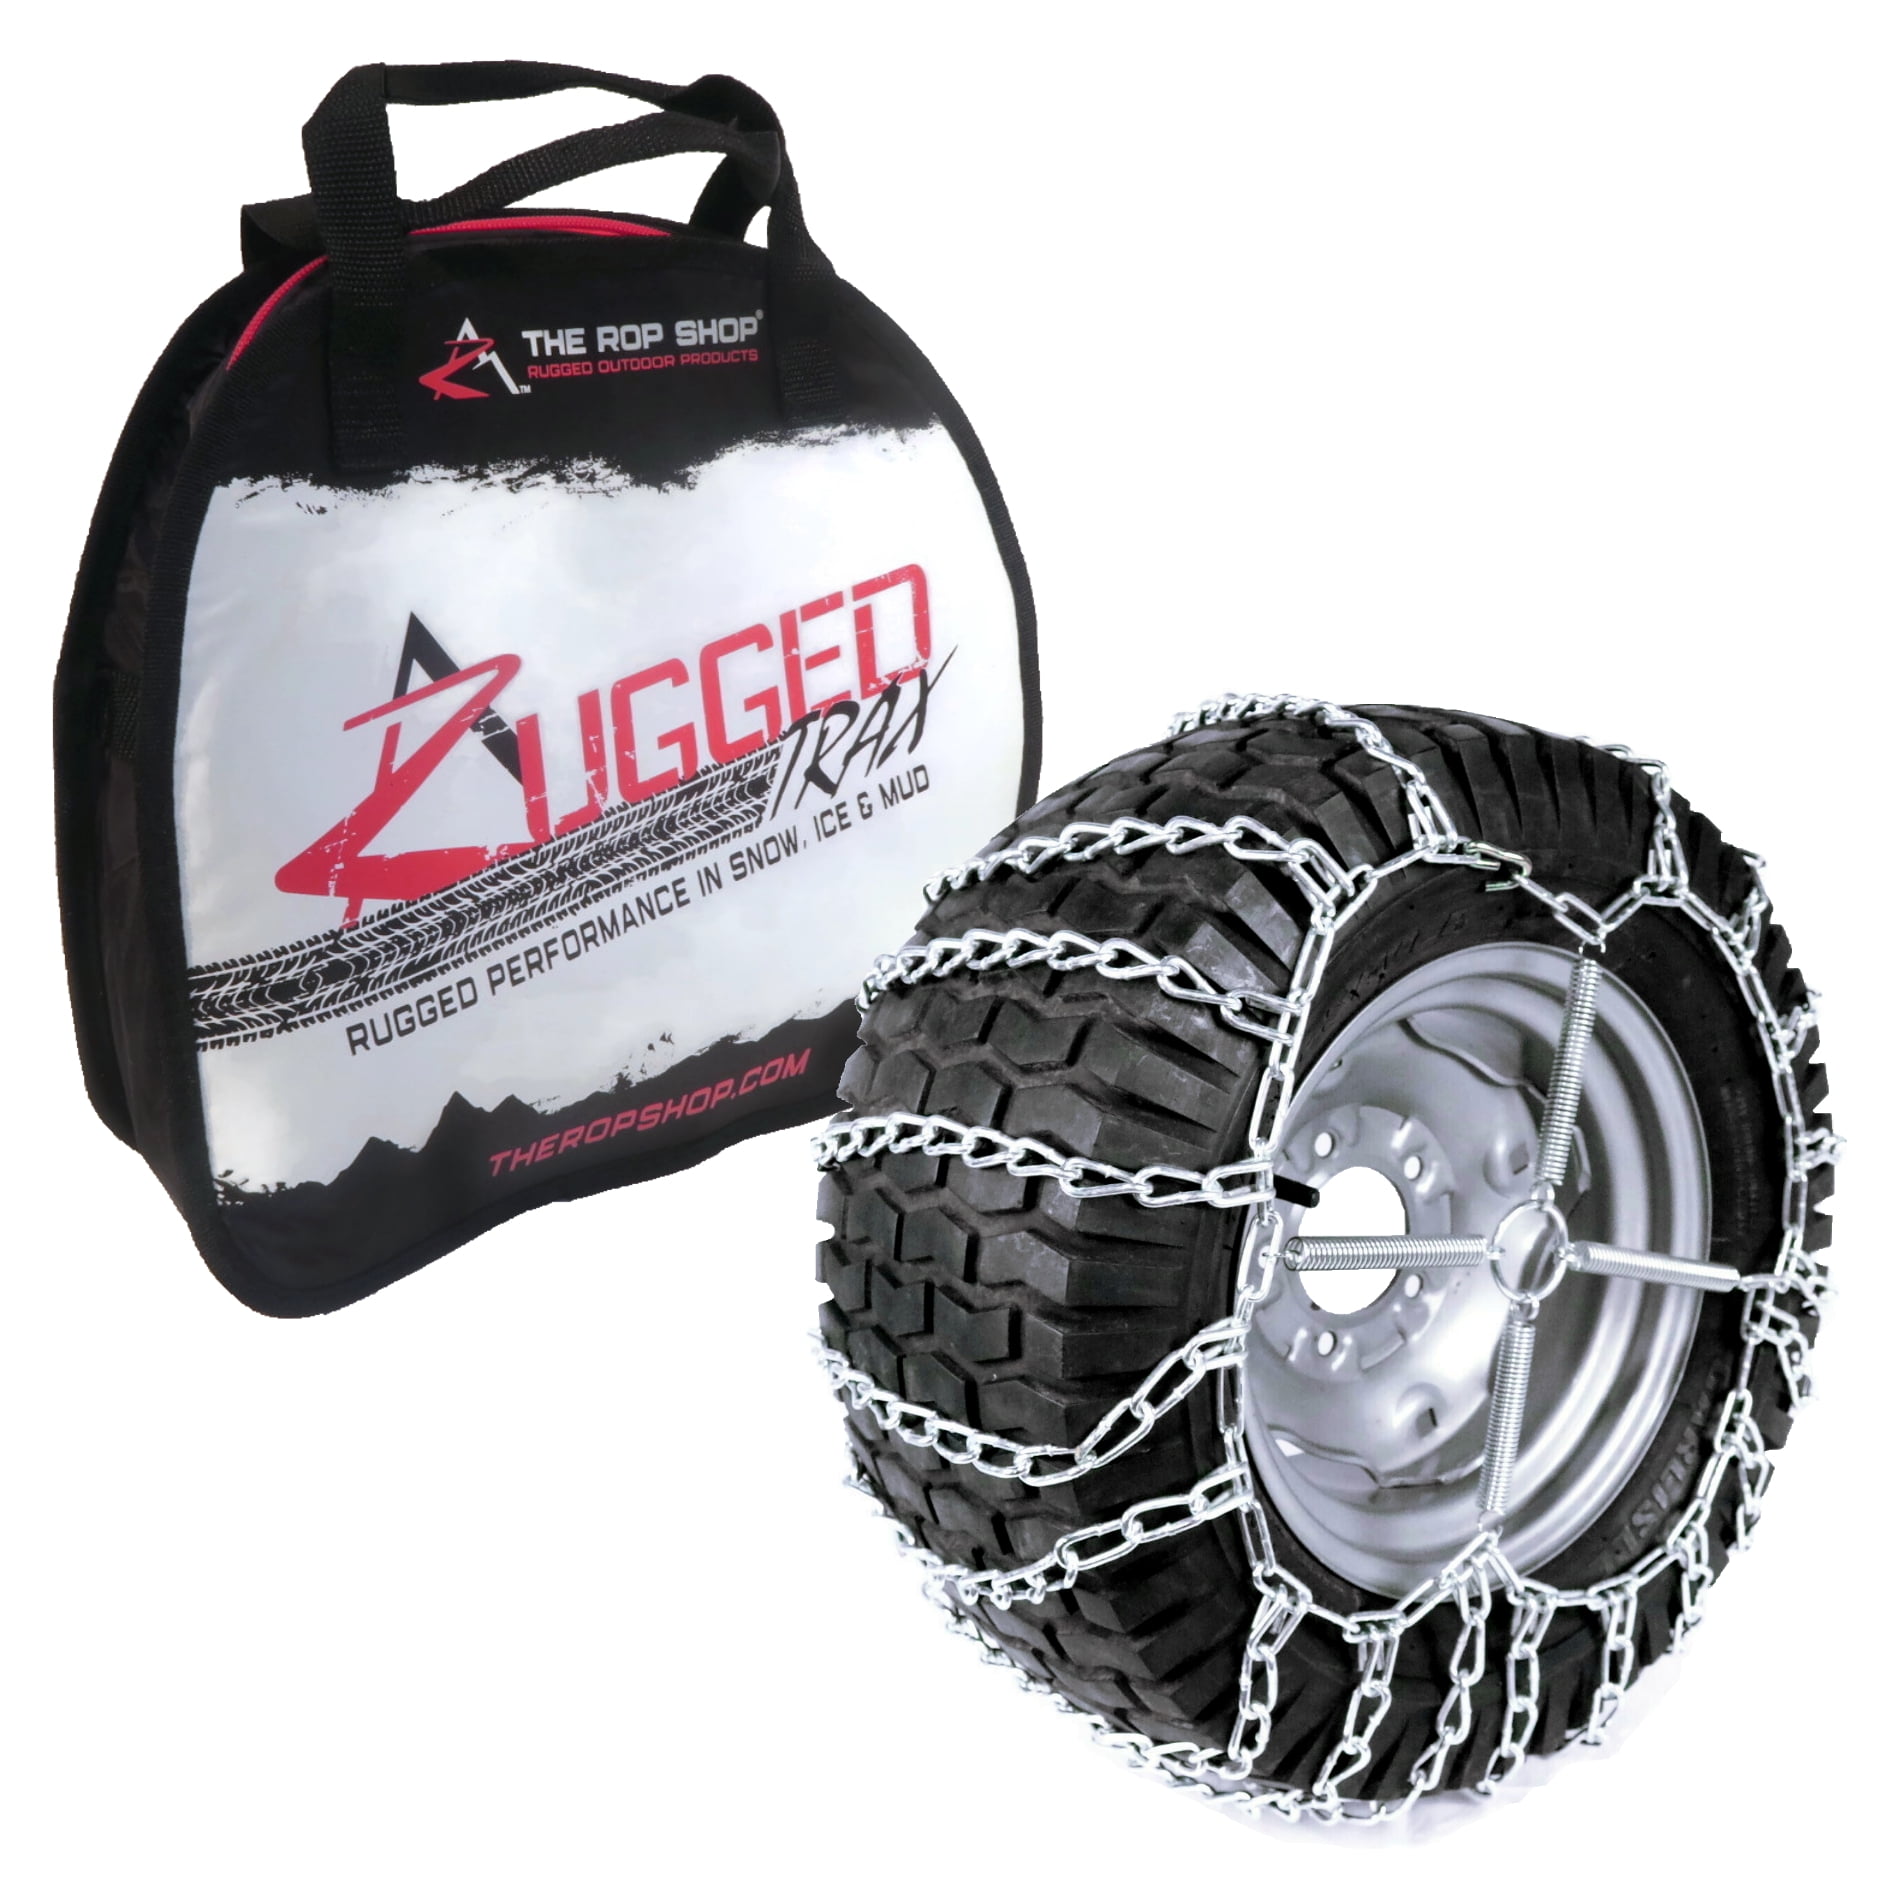 4-Wheelers Mowers & Riders ATV Lawn & Garden Tractors Utility Vehicles Pair of 2 Link Tire Chains & Tensioners 23x8.5x12 for Snow Blowers UTV The ROP Shop 